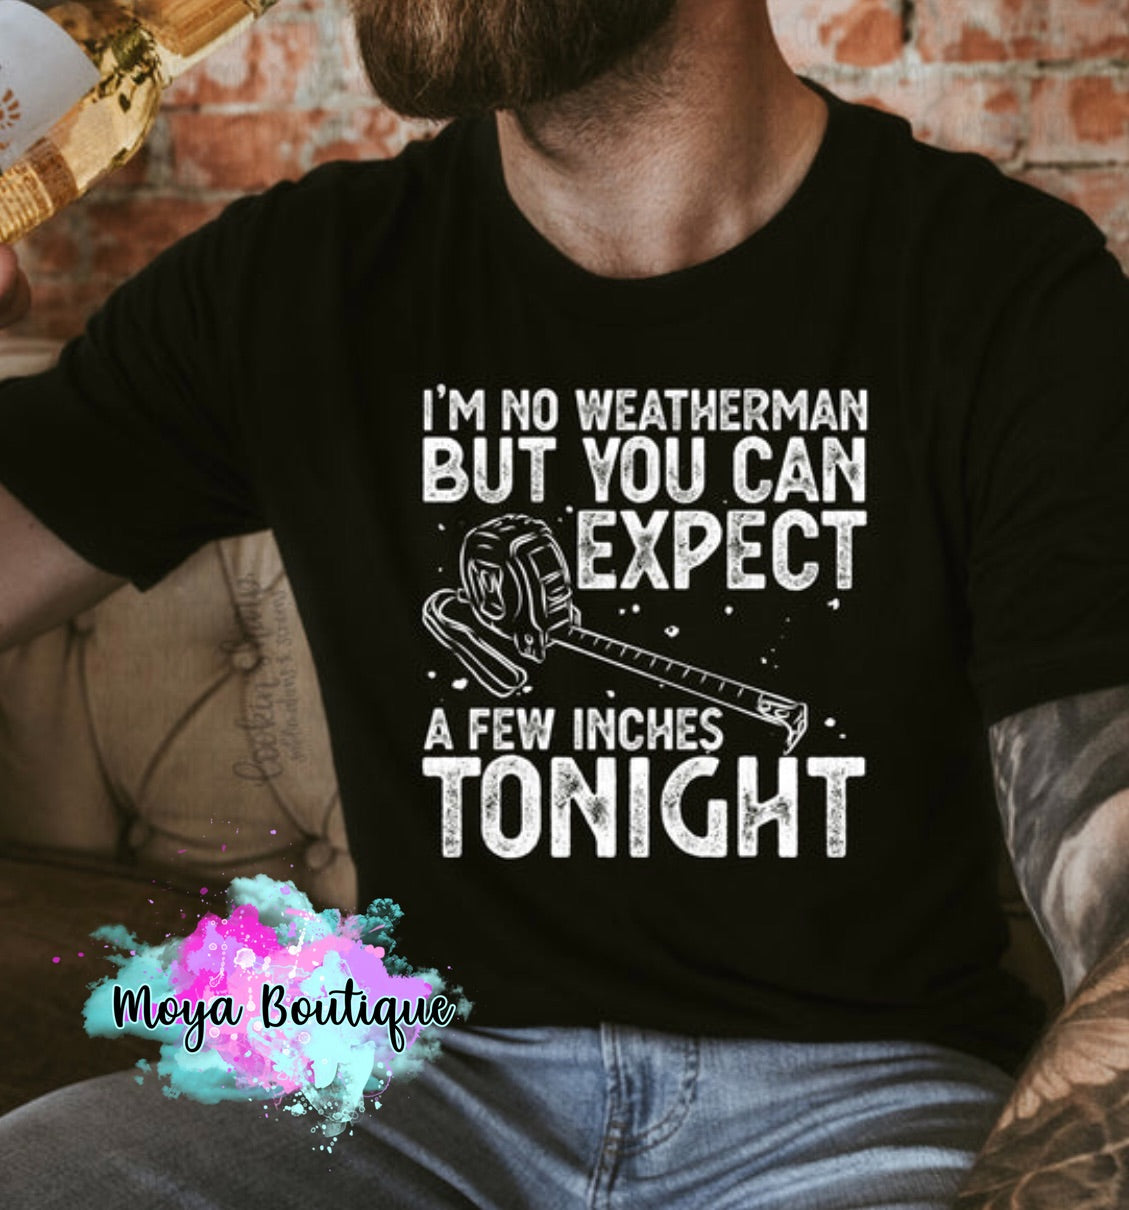 Expect a few inches - husband humor